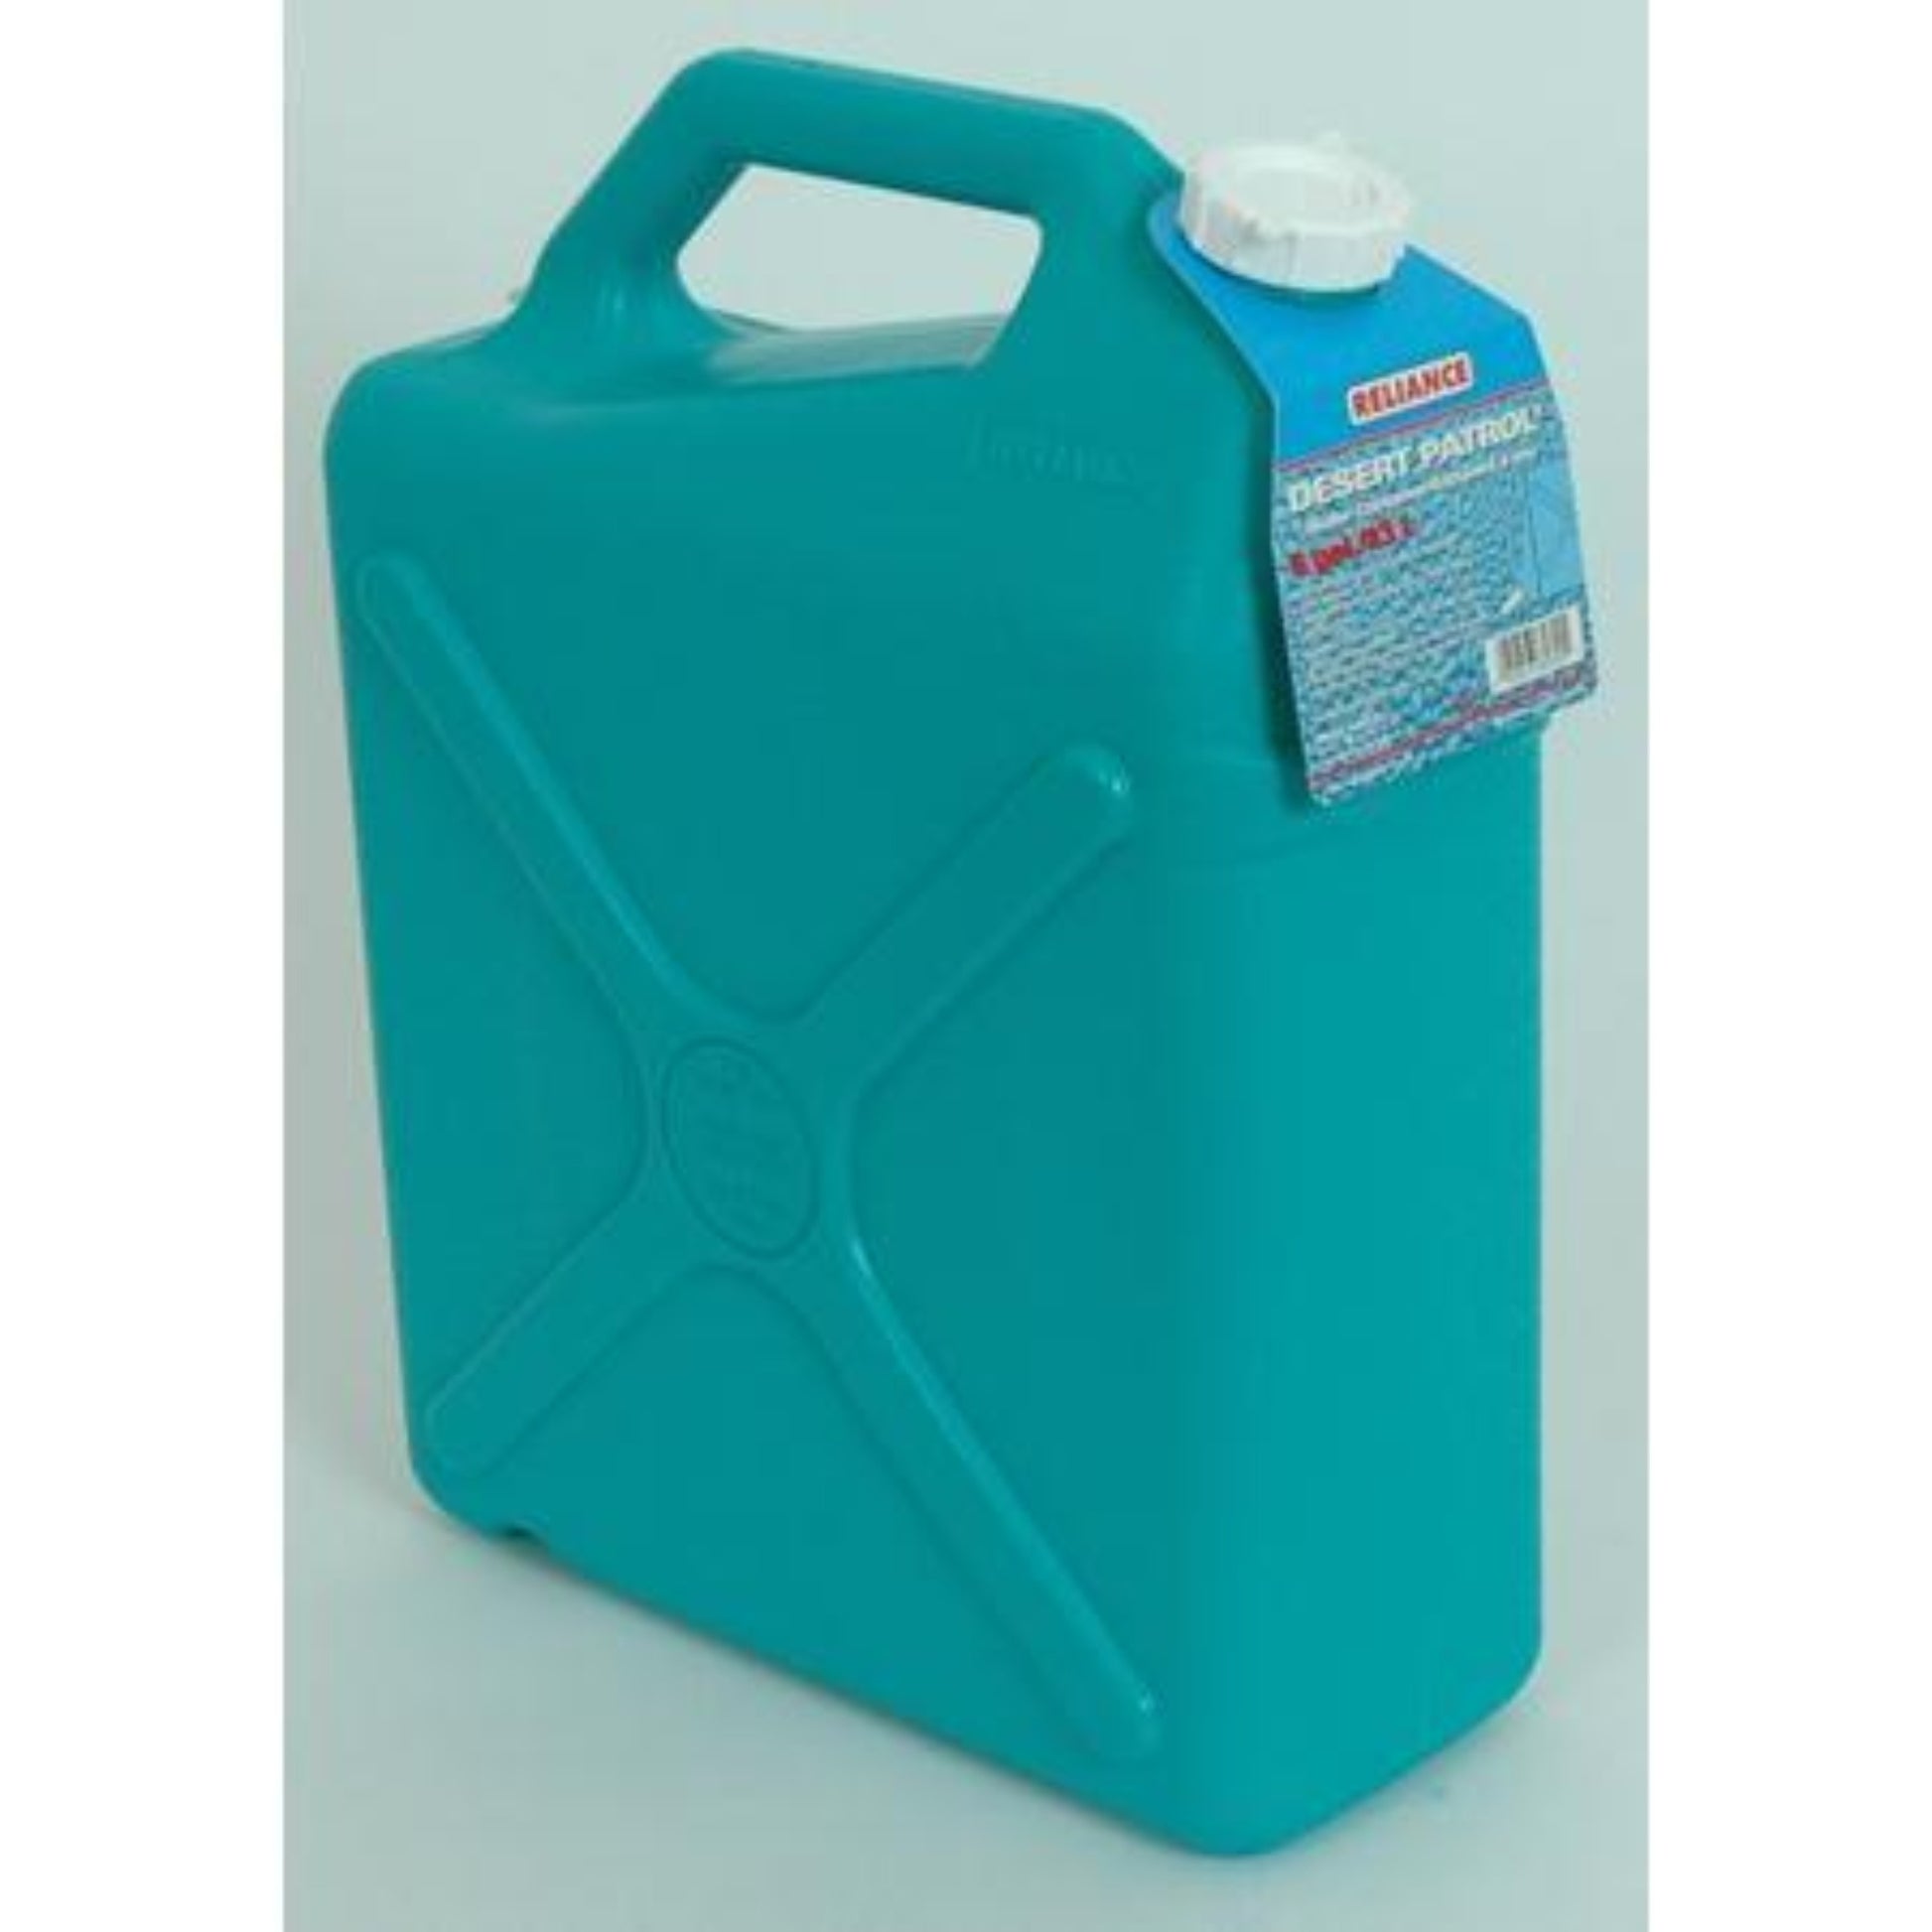 Desert Patrol Water Container. Perfect for camping, and emergency prep. 